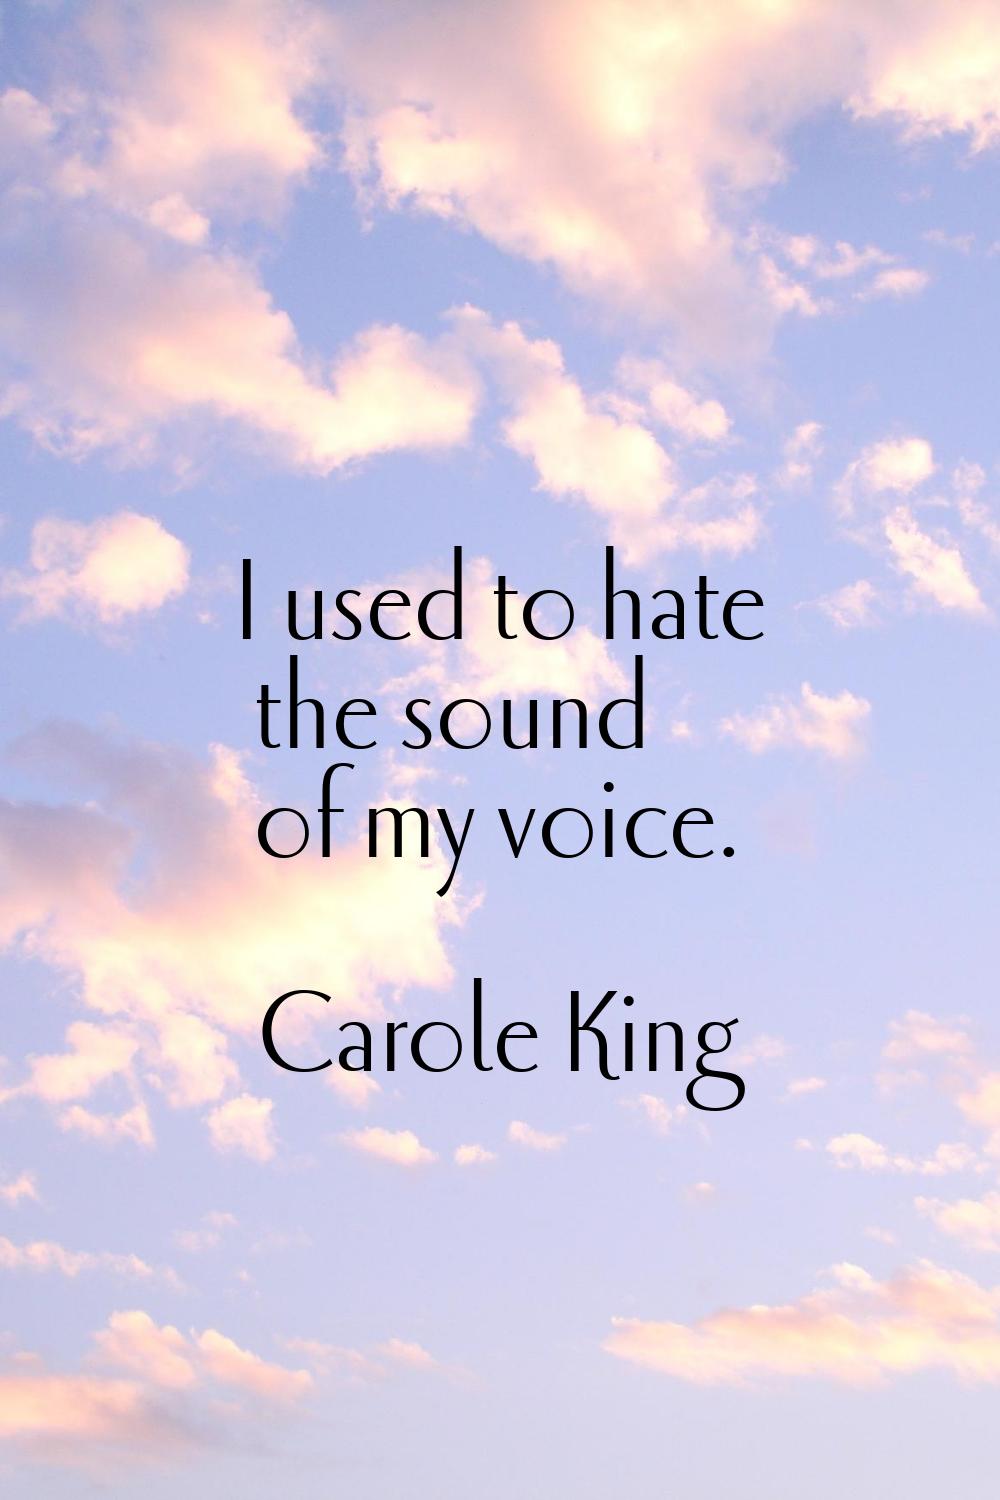 I used to hate the sound of my voice.